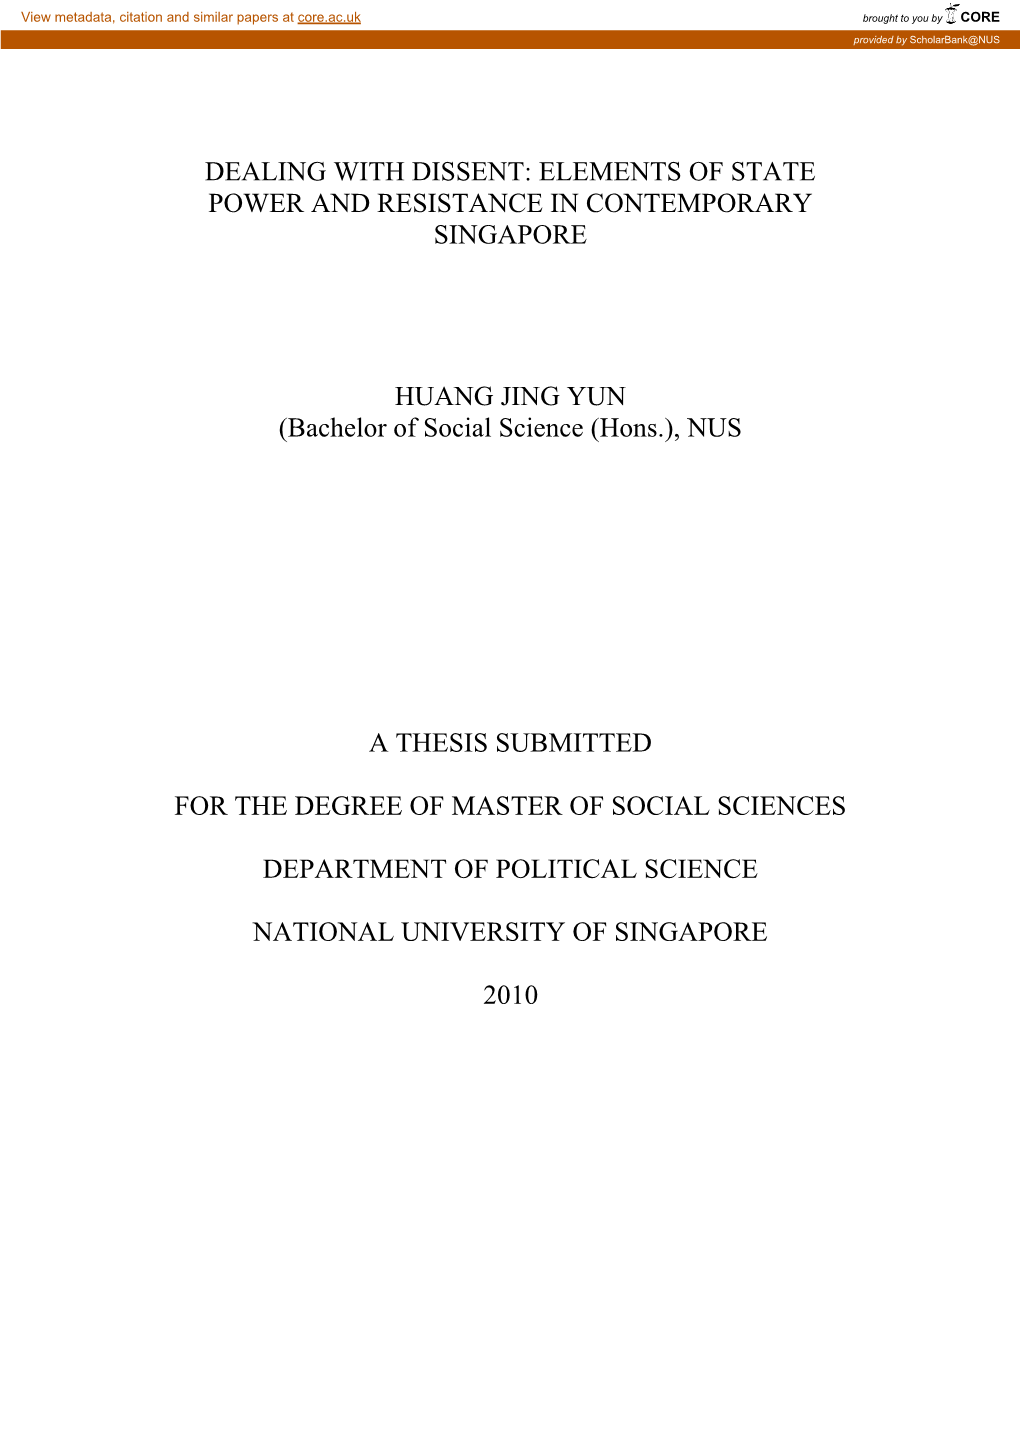 Dealing with Dissent: Elements of State Power and Resistance in Contemporary Singapore